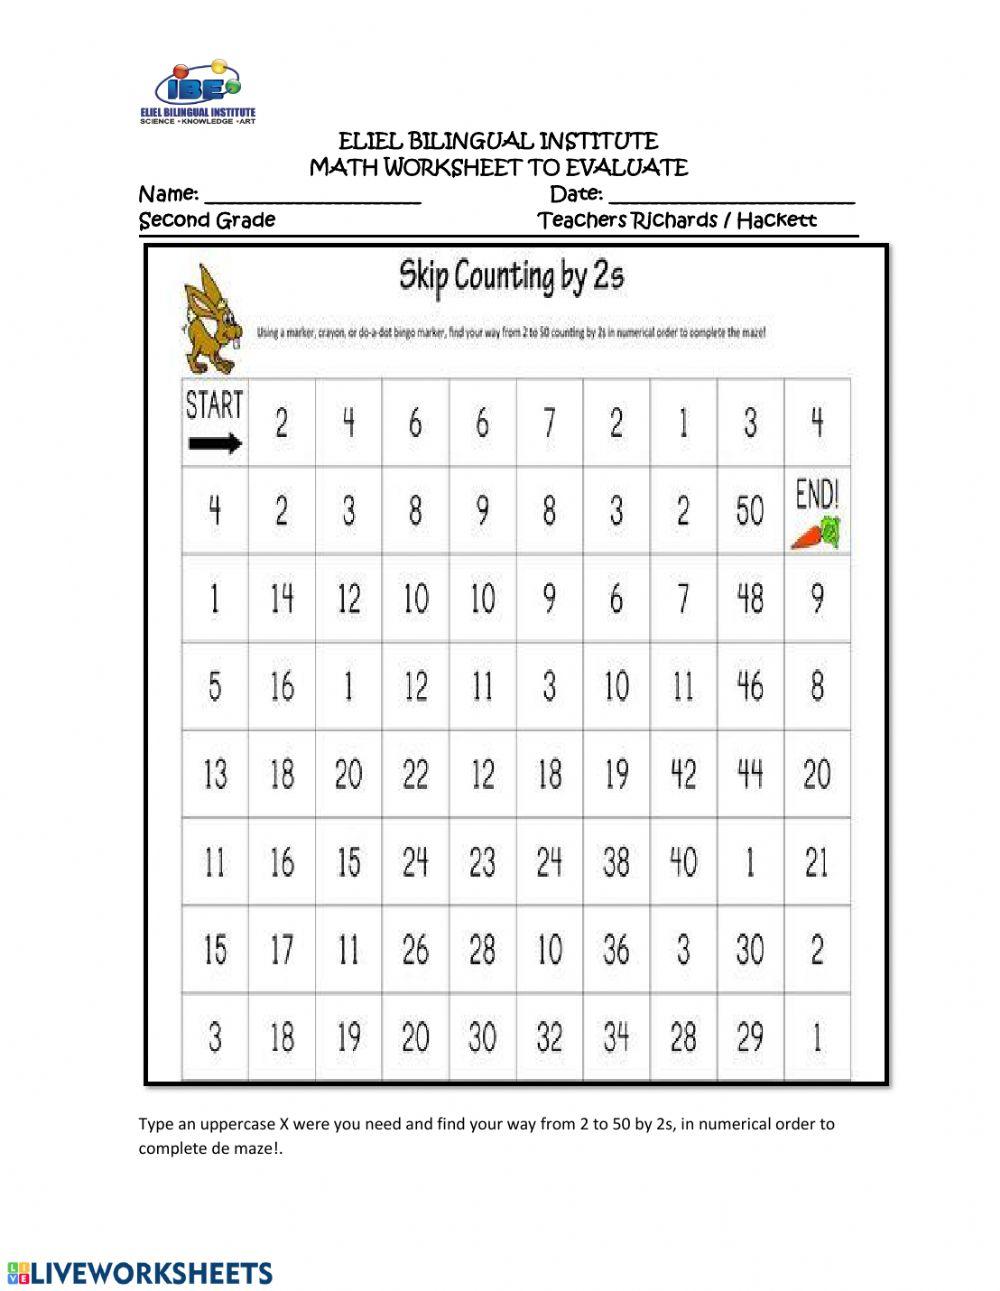 COUNT BY 2s, SUMMATIVE WORKSHEET